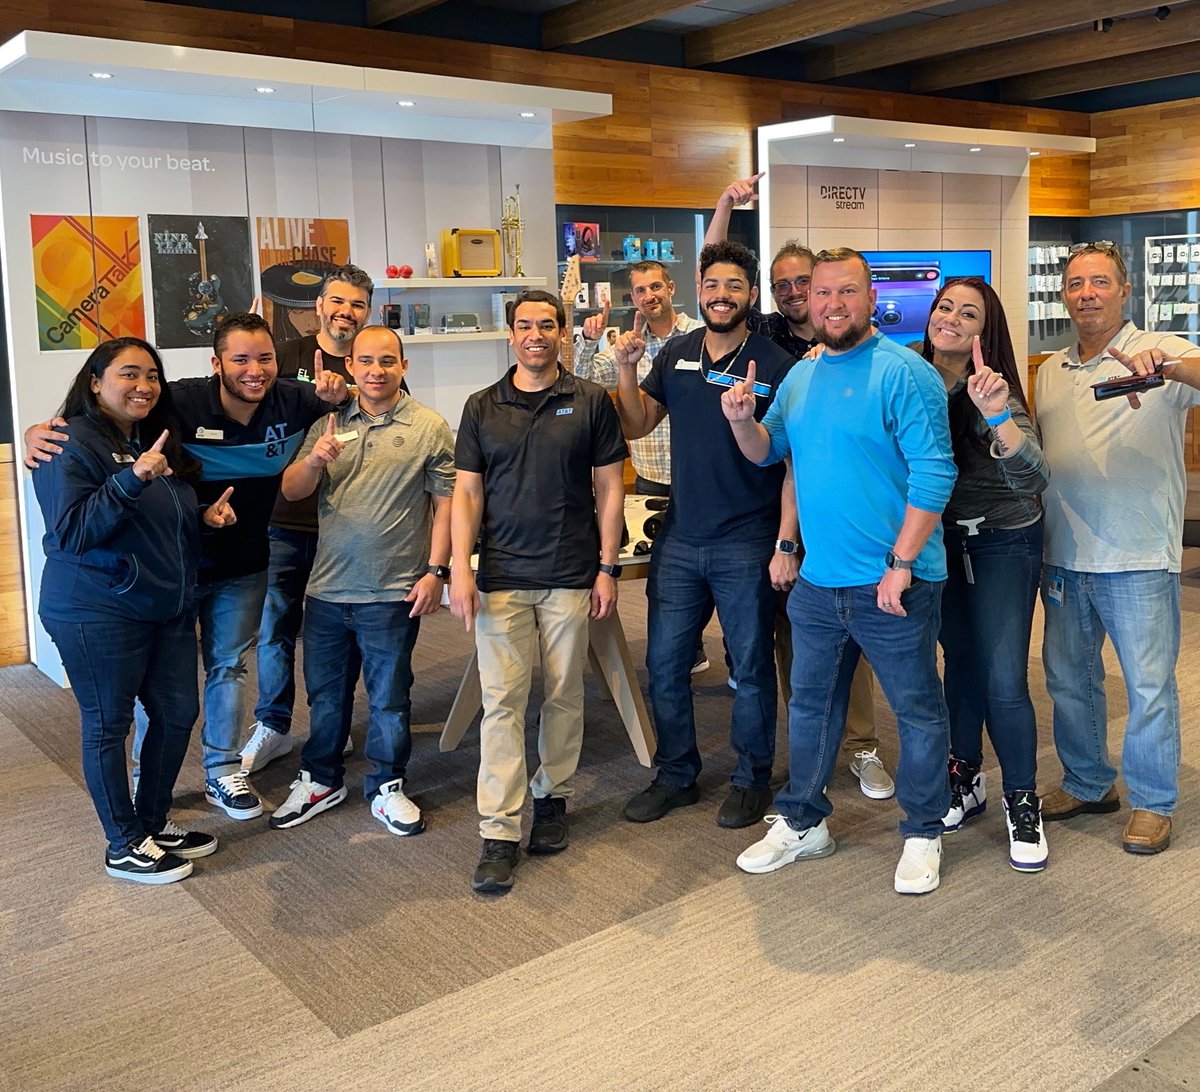 What an alliance with @LifeatAlliance 😝Spruce International was so smooth we even got Matt in IT 2 smile! There is no life better than #LifeAtATT! These folks are ready 2 serve our customers in Westshore! #conexion @theeastregion @EastRegionAR @LifeAtATT @ATT @One_FLA @jrluna11